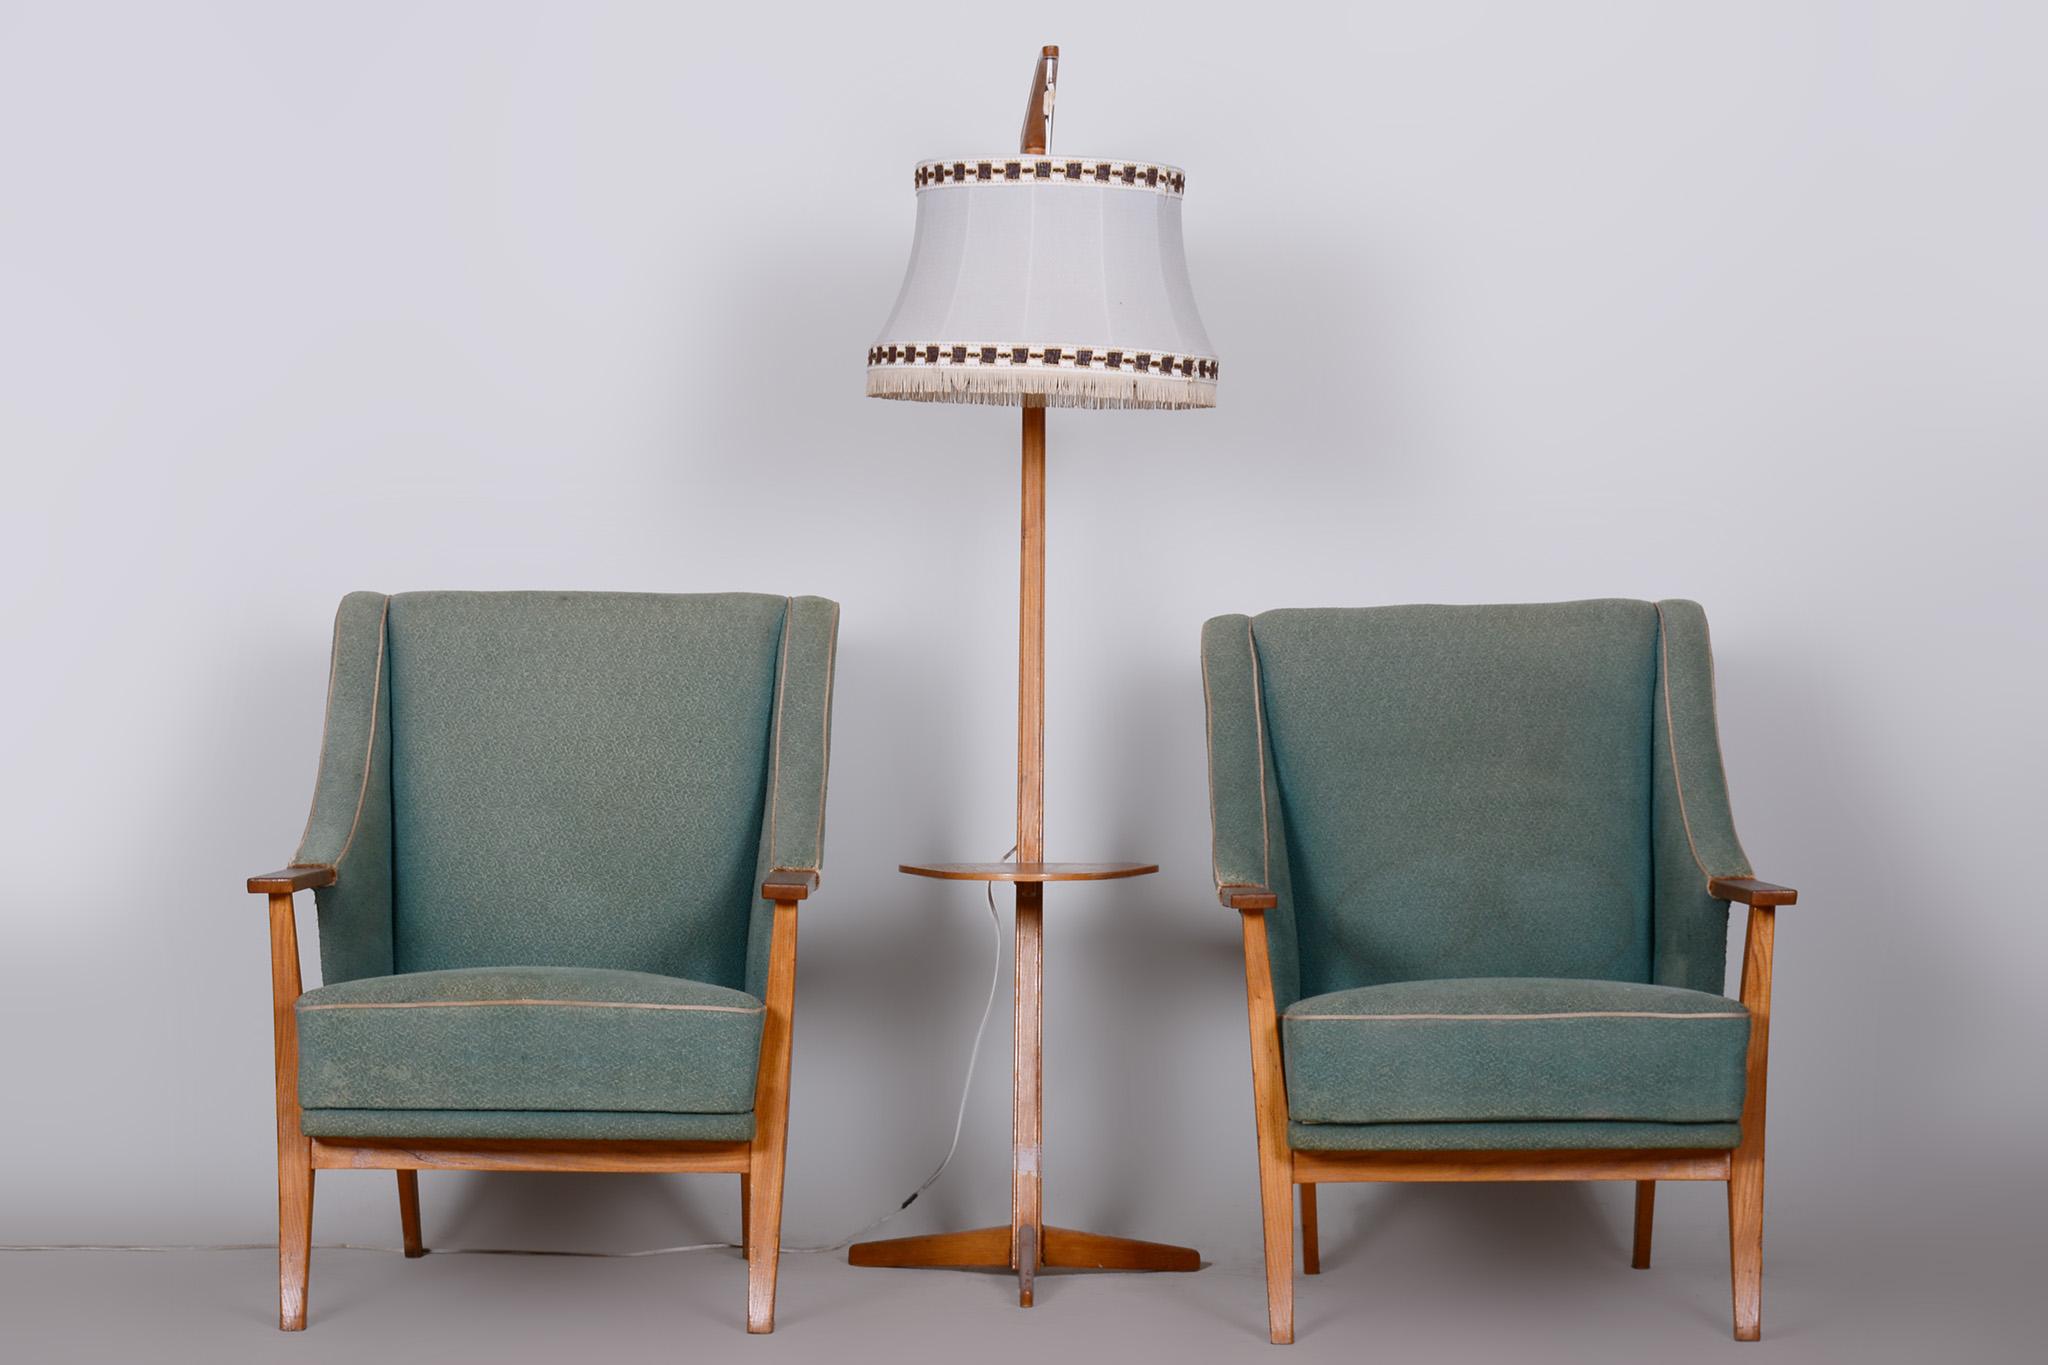 Pair of Unique Green Beech ArtDeco Armchairs Made in 1940s, Denmark For Sale 3